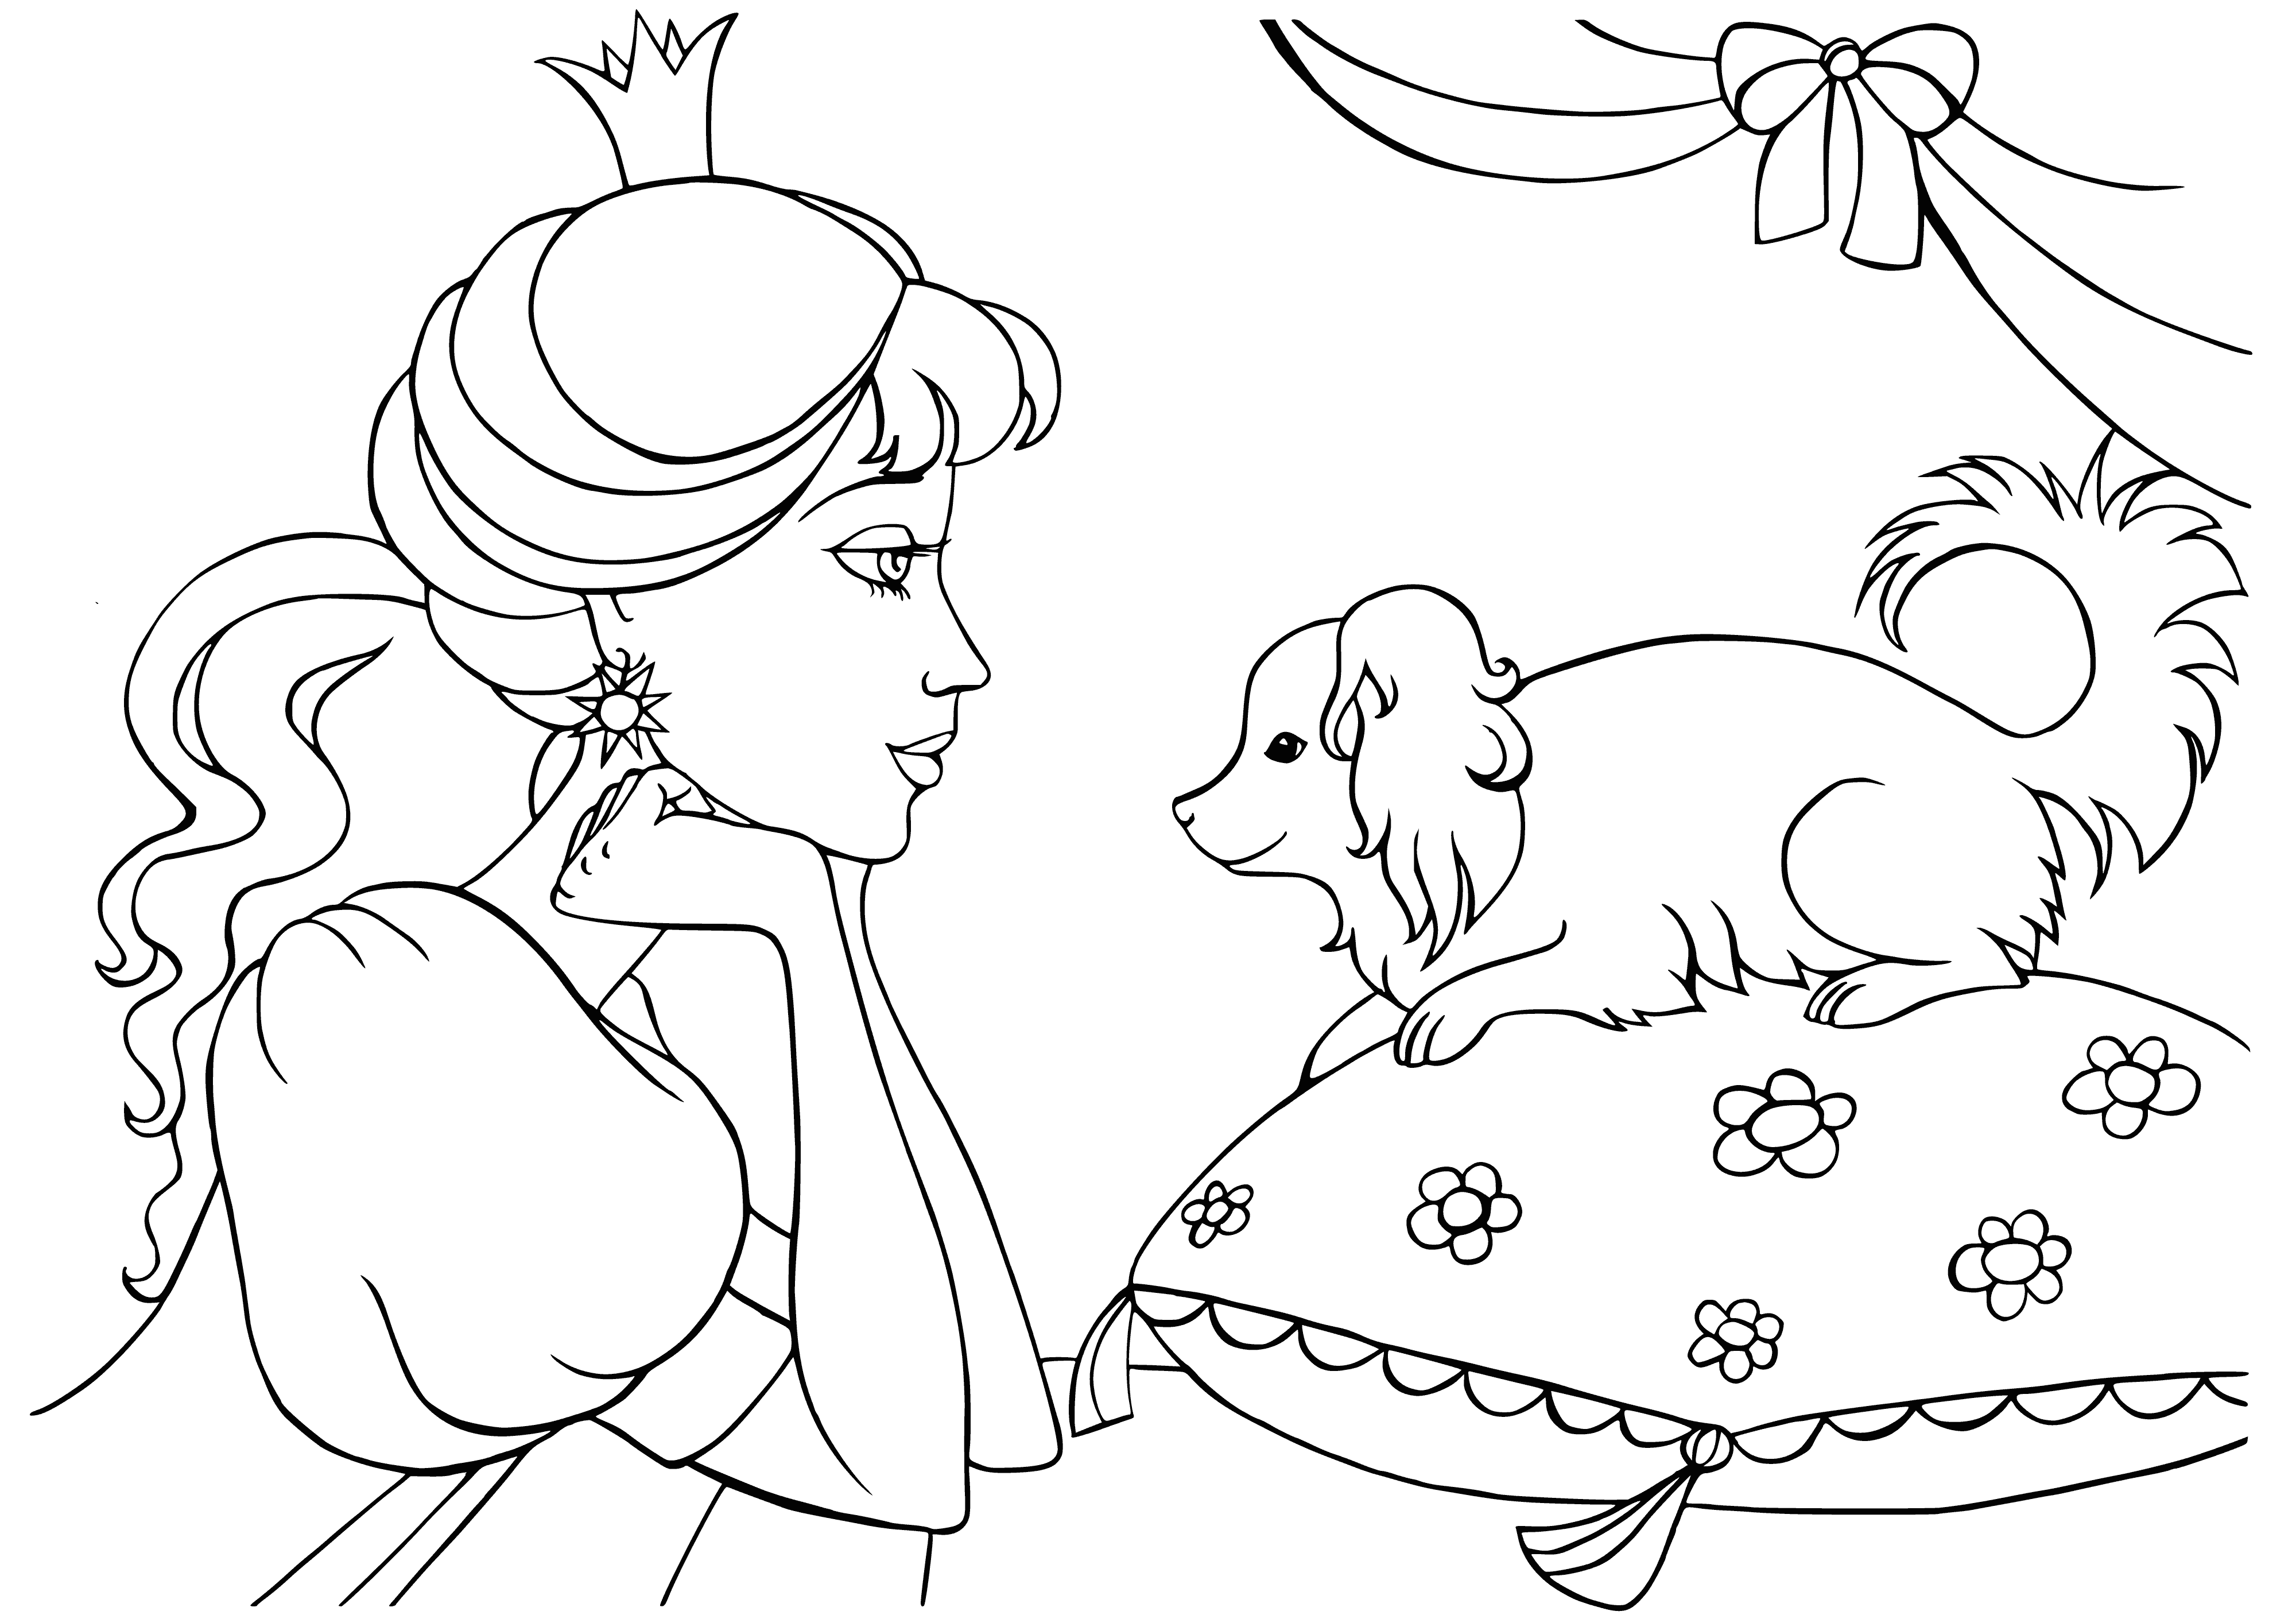 coloring page: Fairy Princess stands in front of a castle with turrets and ivy, a bridge over a river, and a forest on the far side. #fairytale